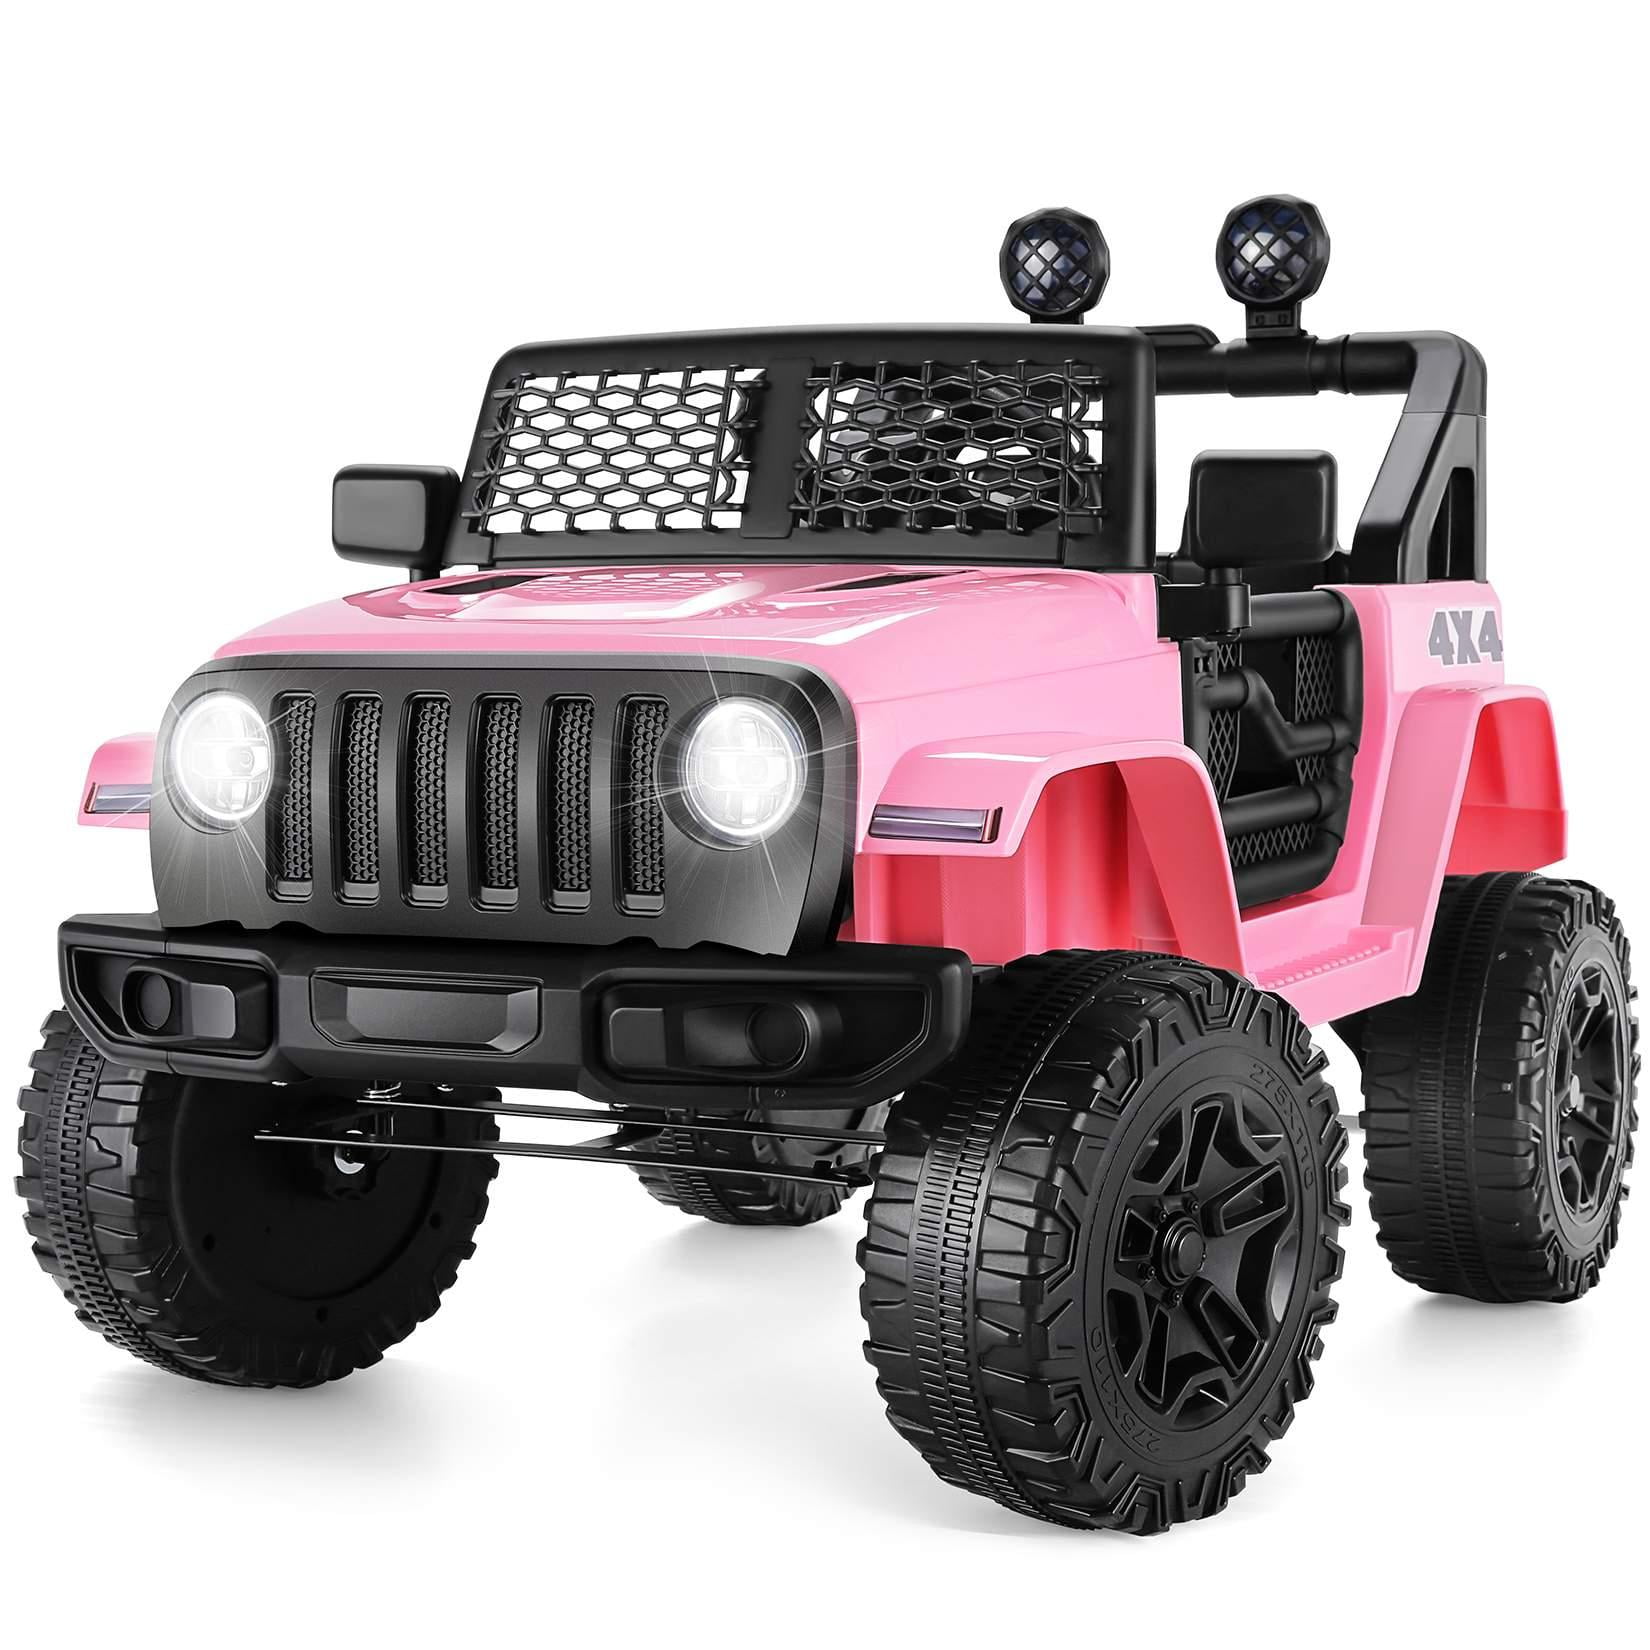 Funcid 12V Kids Powered Ride on Truck Car with Parent Remote Control, Bluetooth Music, Spring Suspension, LED Lights - Pink